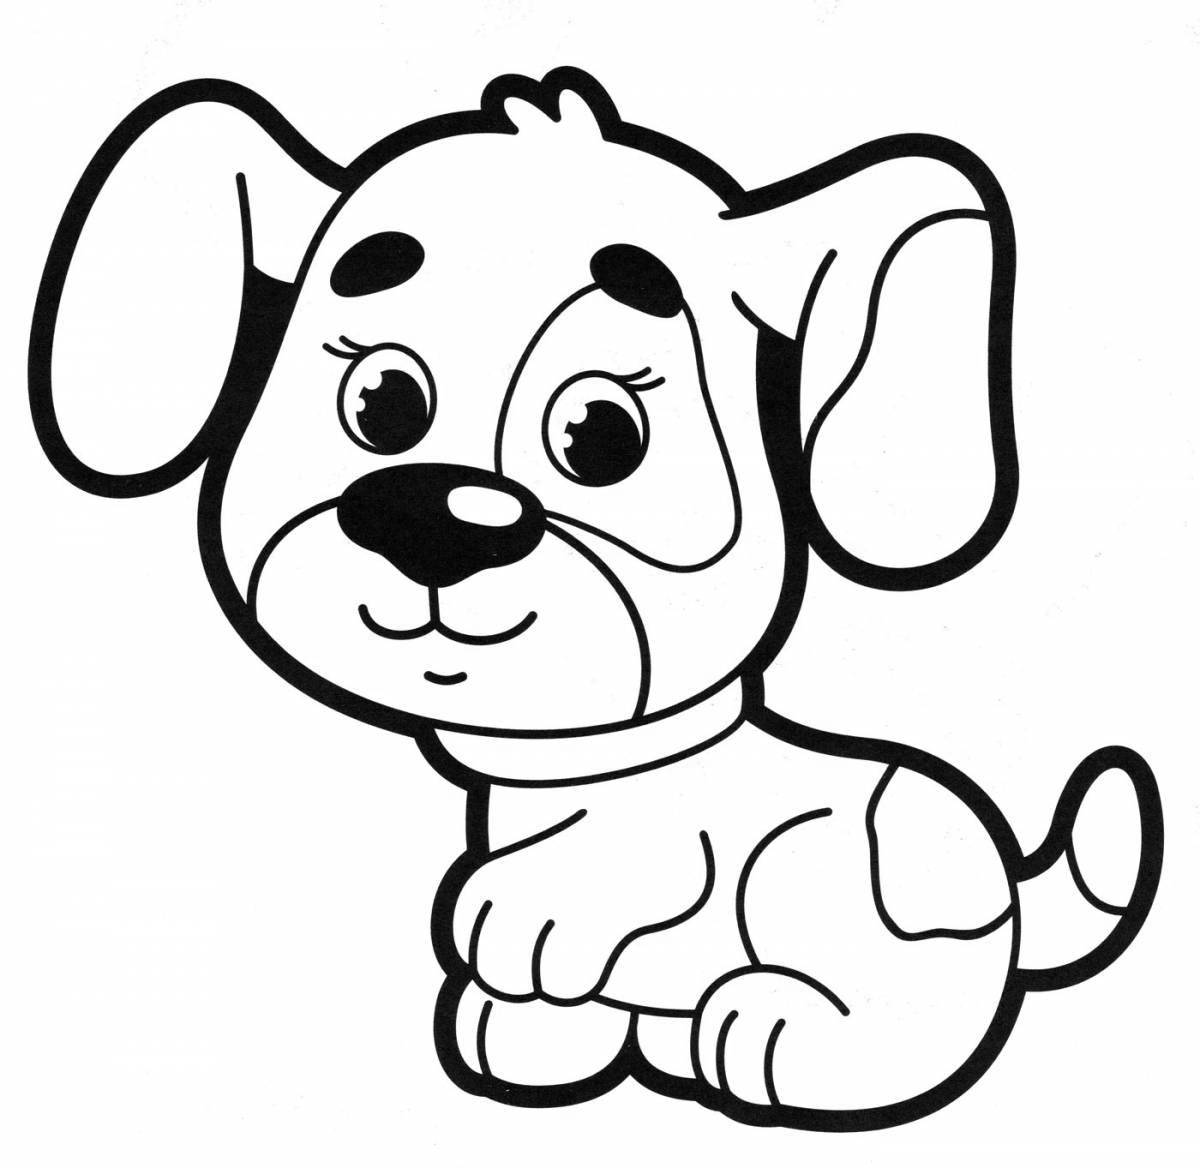 Amazing dog coloring book for kids 3-4 years old